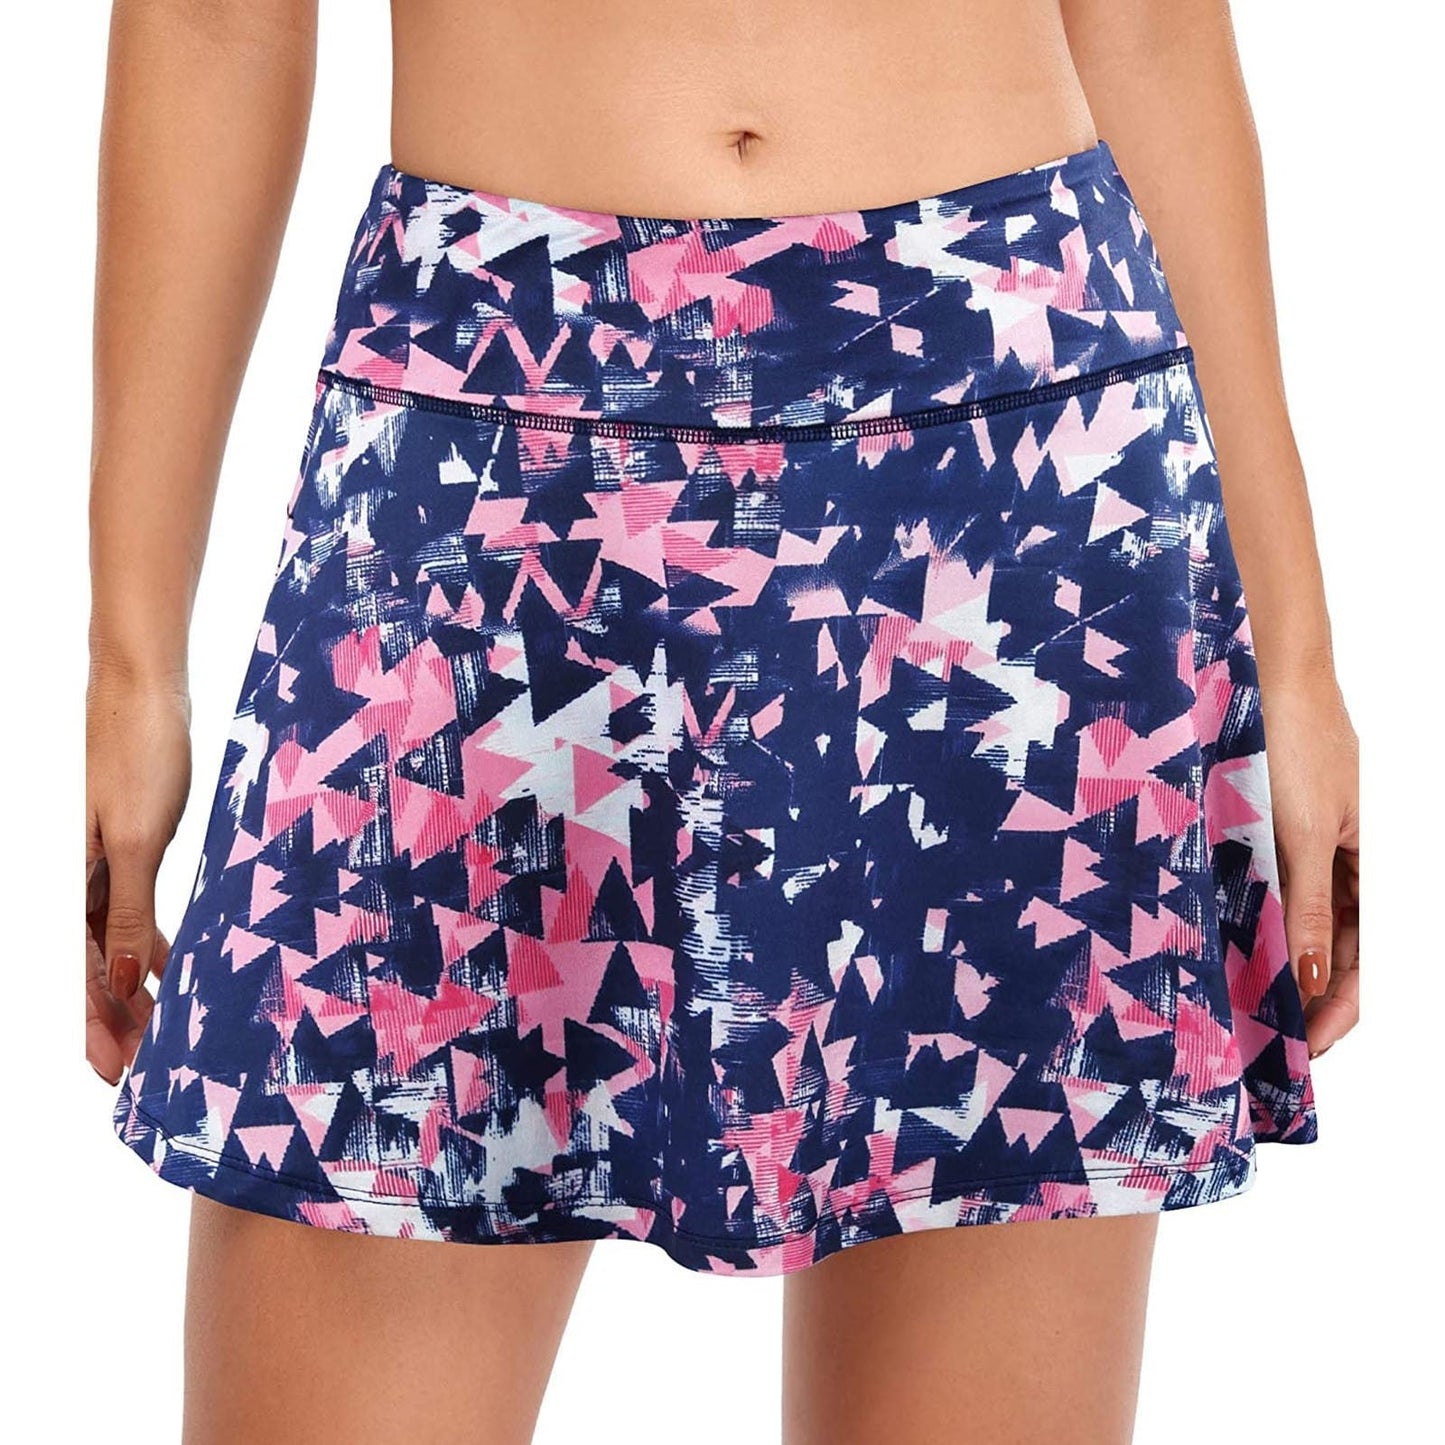 Fashionable Tennis Skorts with Floral Print (with pocket) - Linions